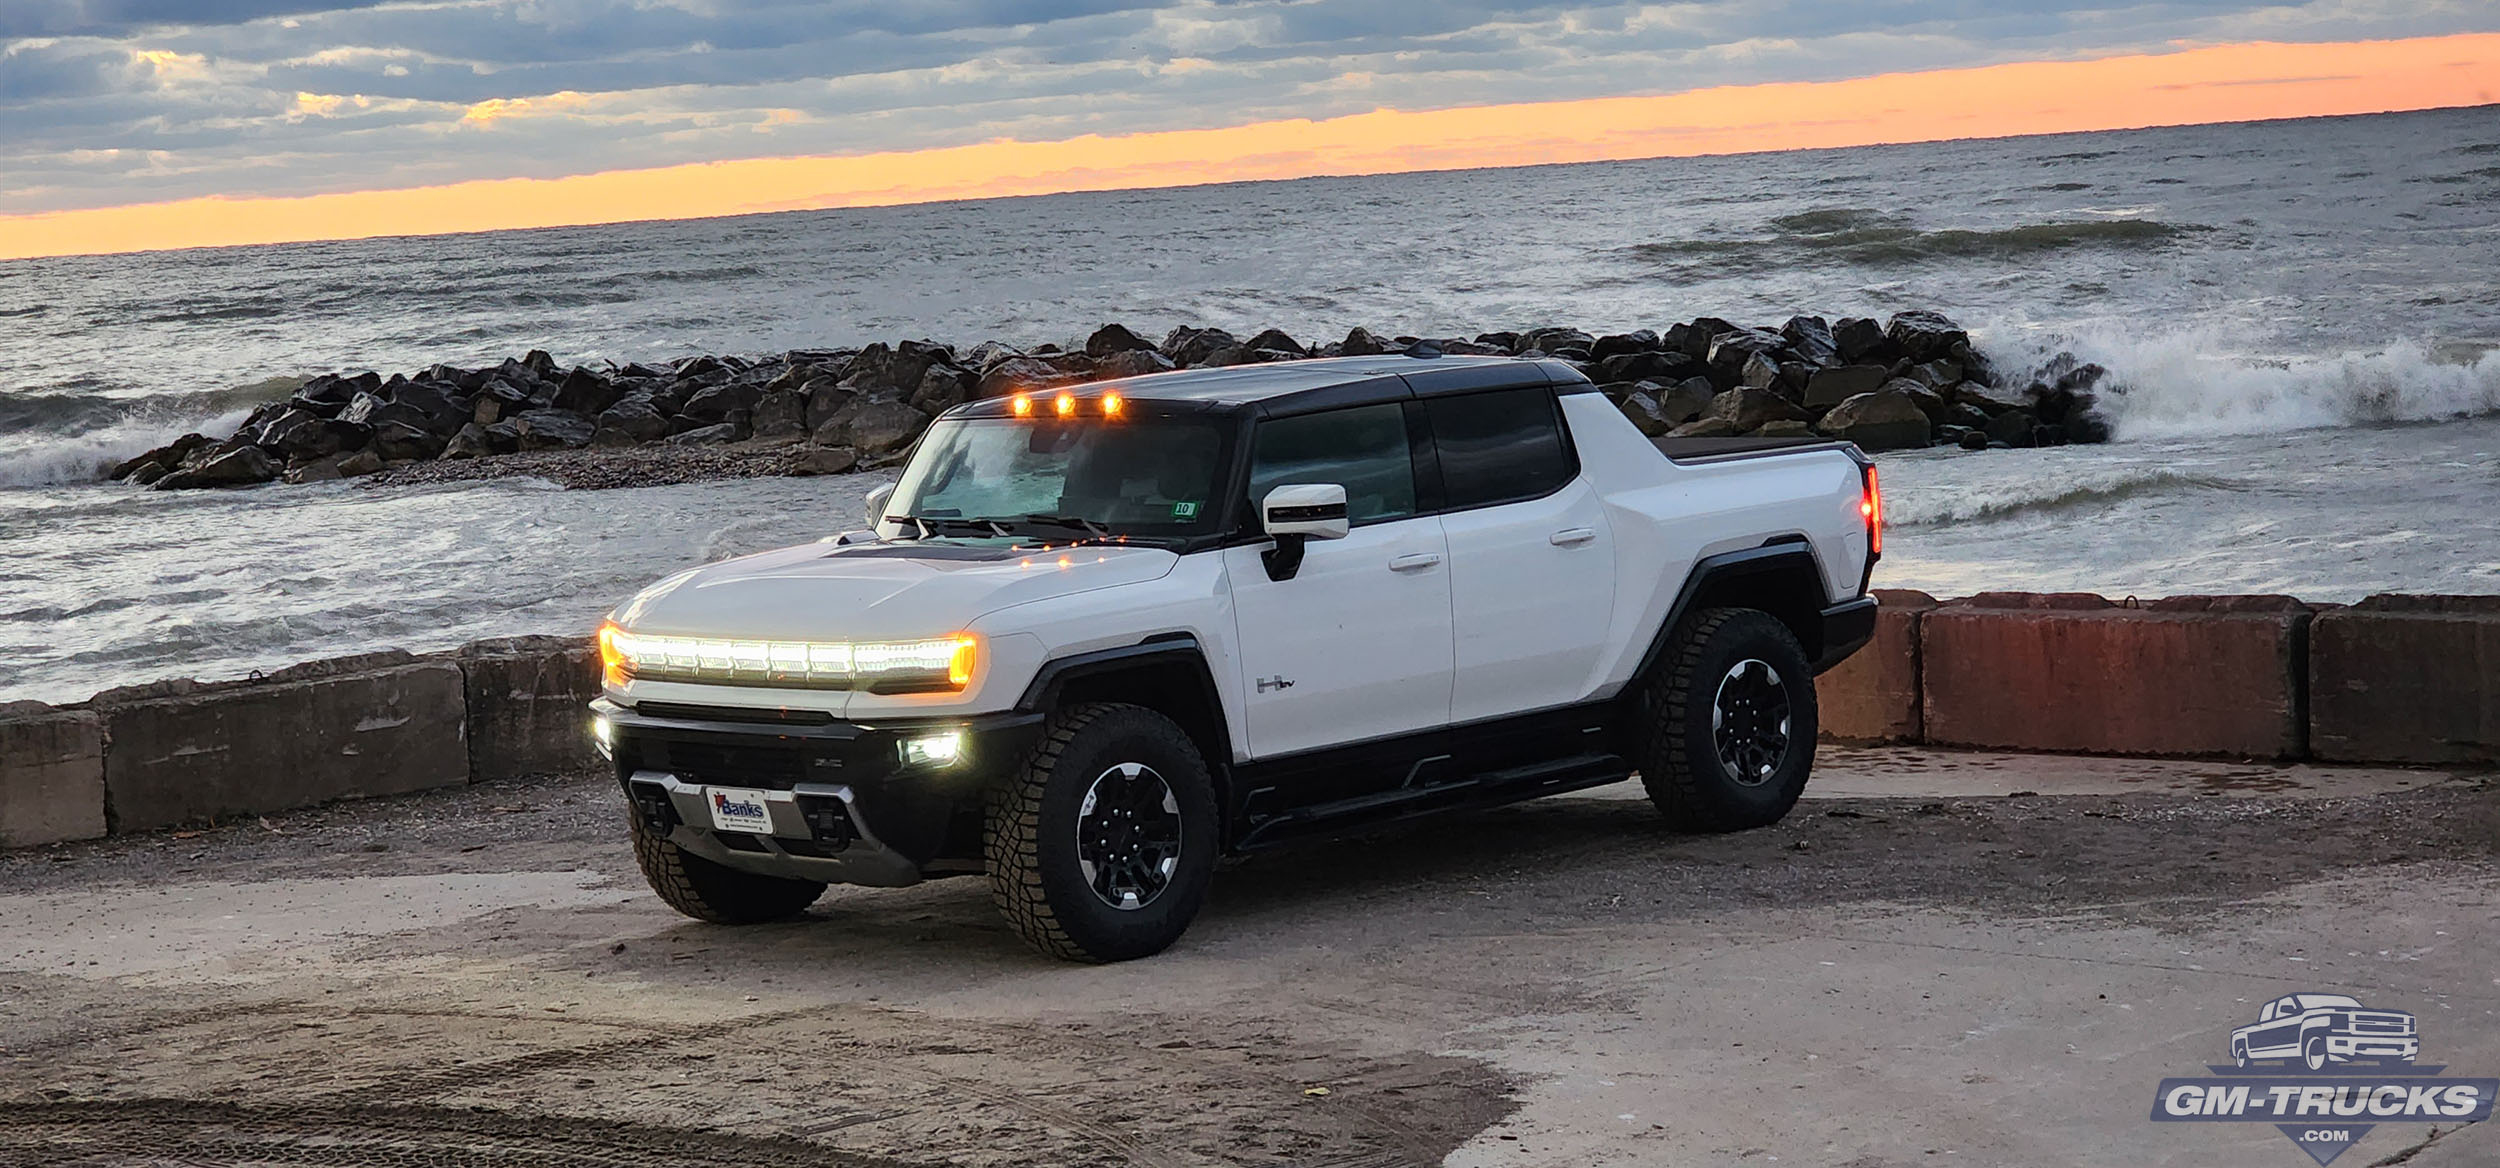 GM-Trucks.com HUMMER EV Next To Lake Erie. Perhaps we shouldn't have done this.